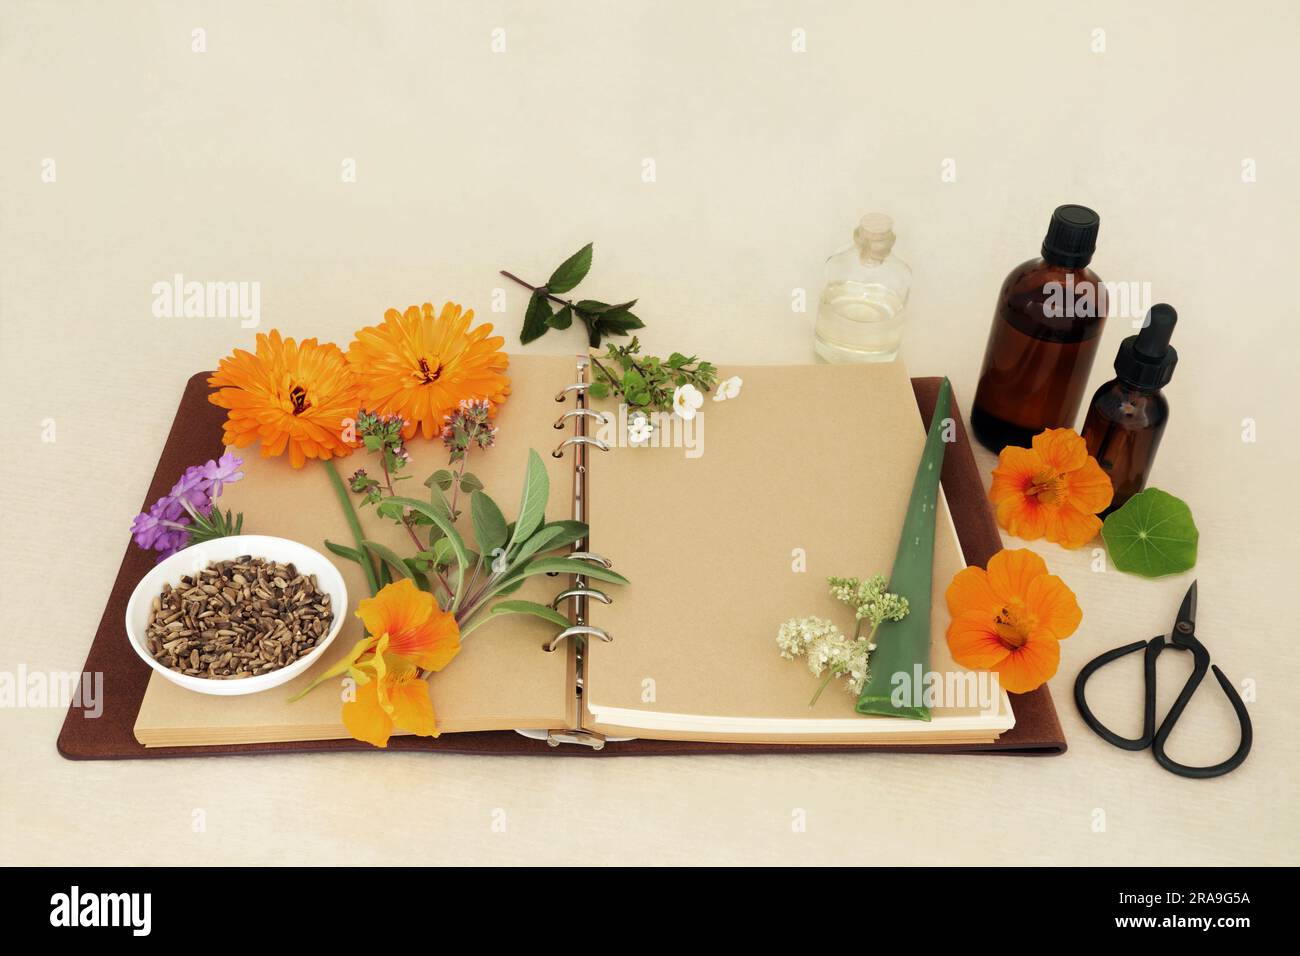 Natural herbal medicine with herbs and flowers, notebook and aromatherapy essential oil bottles. For alternative homeopathic and naturopathic medicine. Stock Photo